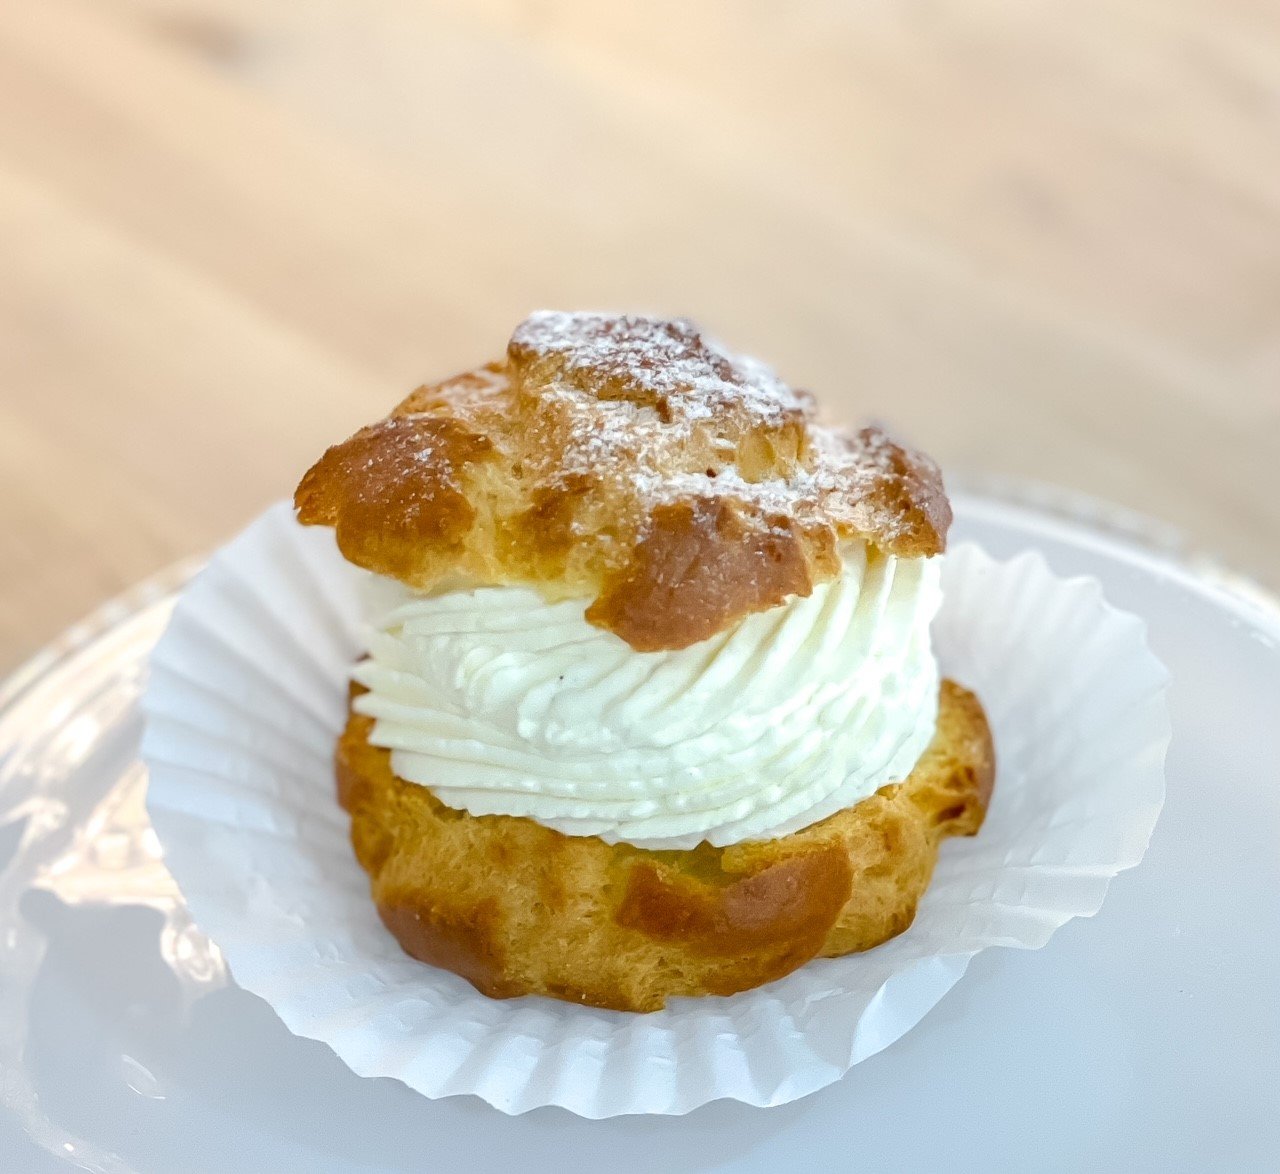 Cream Puffs! Do you love them as much as we do?
.
Here's the menu for Saturday, May 18th.
.
Scones:
Strawberry Chocolate
.
Cookies:
Chocolate Chip
Not My Cookie
.
Special cookies this month:
Orange Blossom Poppy
Tuxedo
Confetti
.
Brownies
Blondies
.
